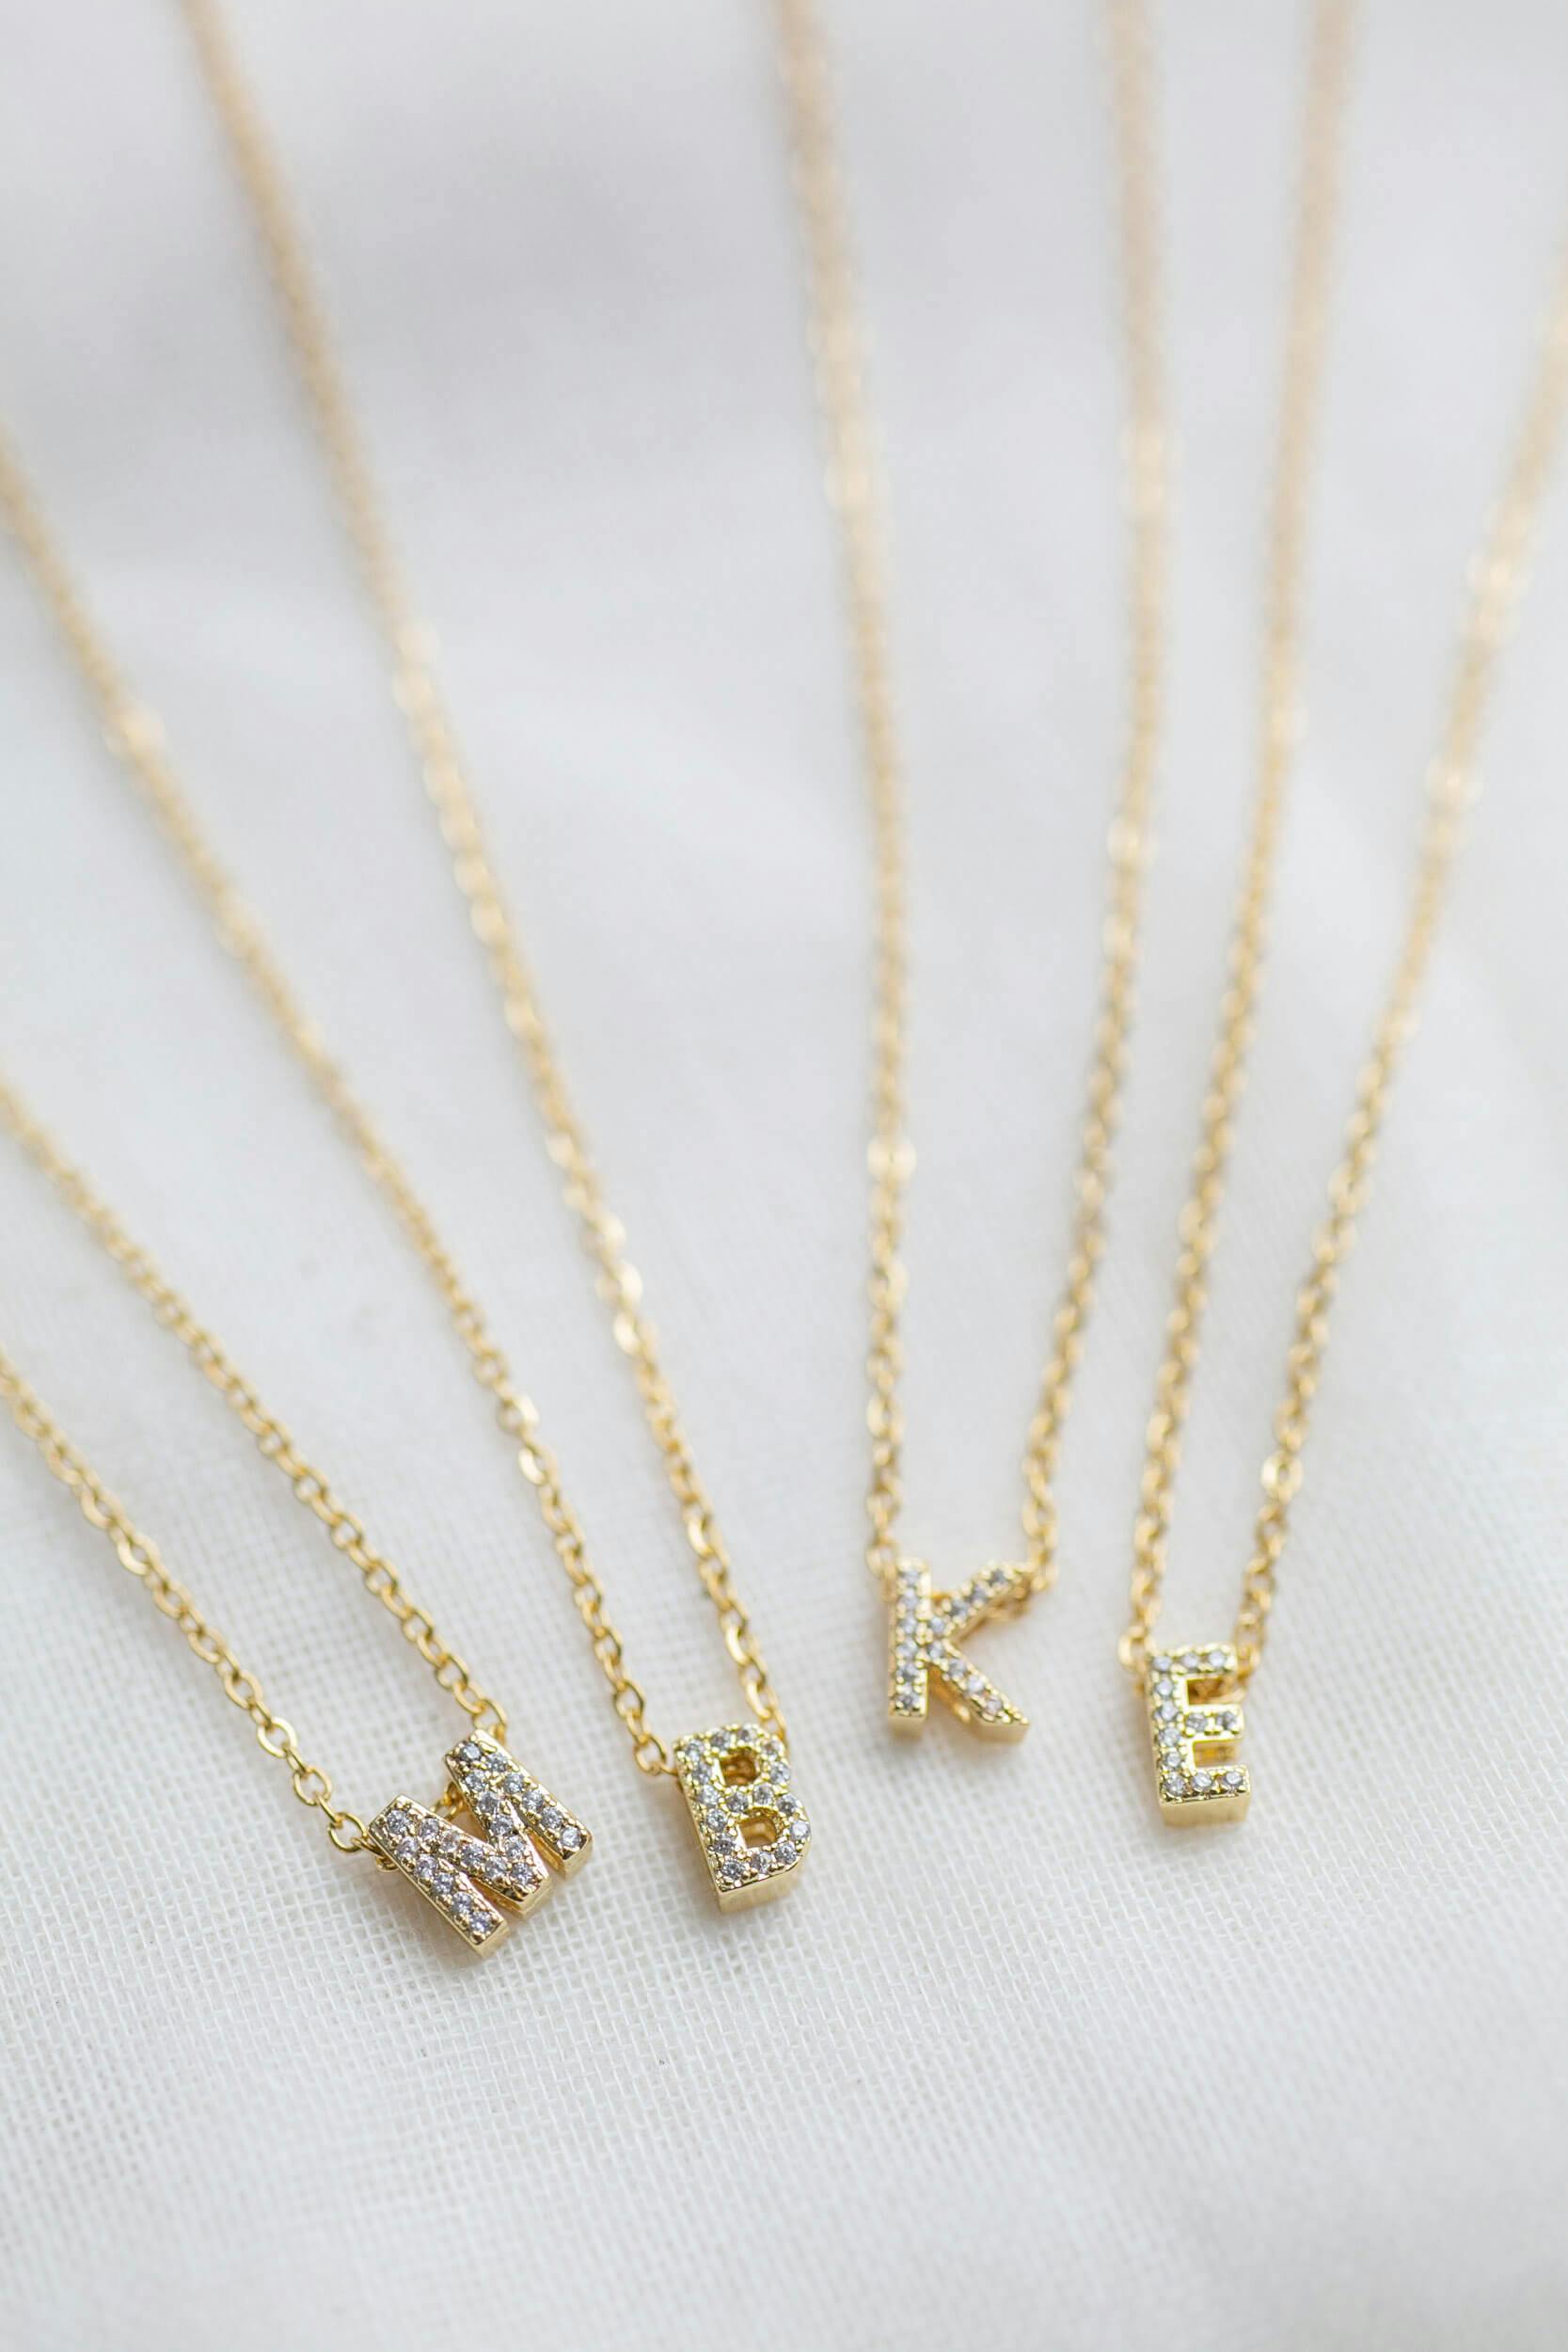 Sparkly Initial Necklace - undefined - Jewel Therapy